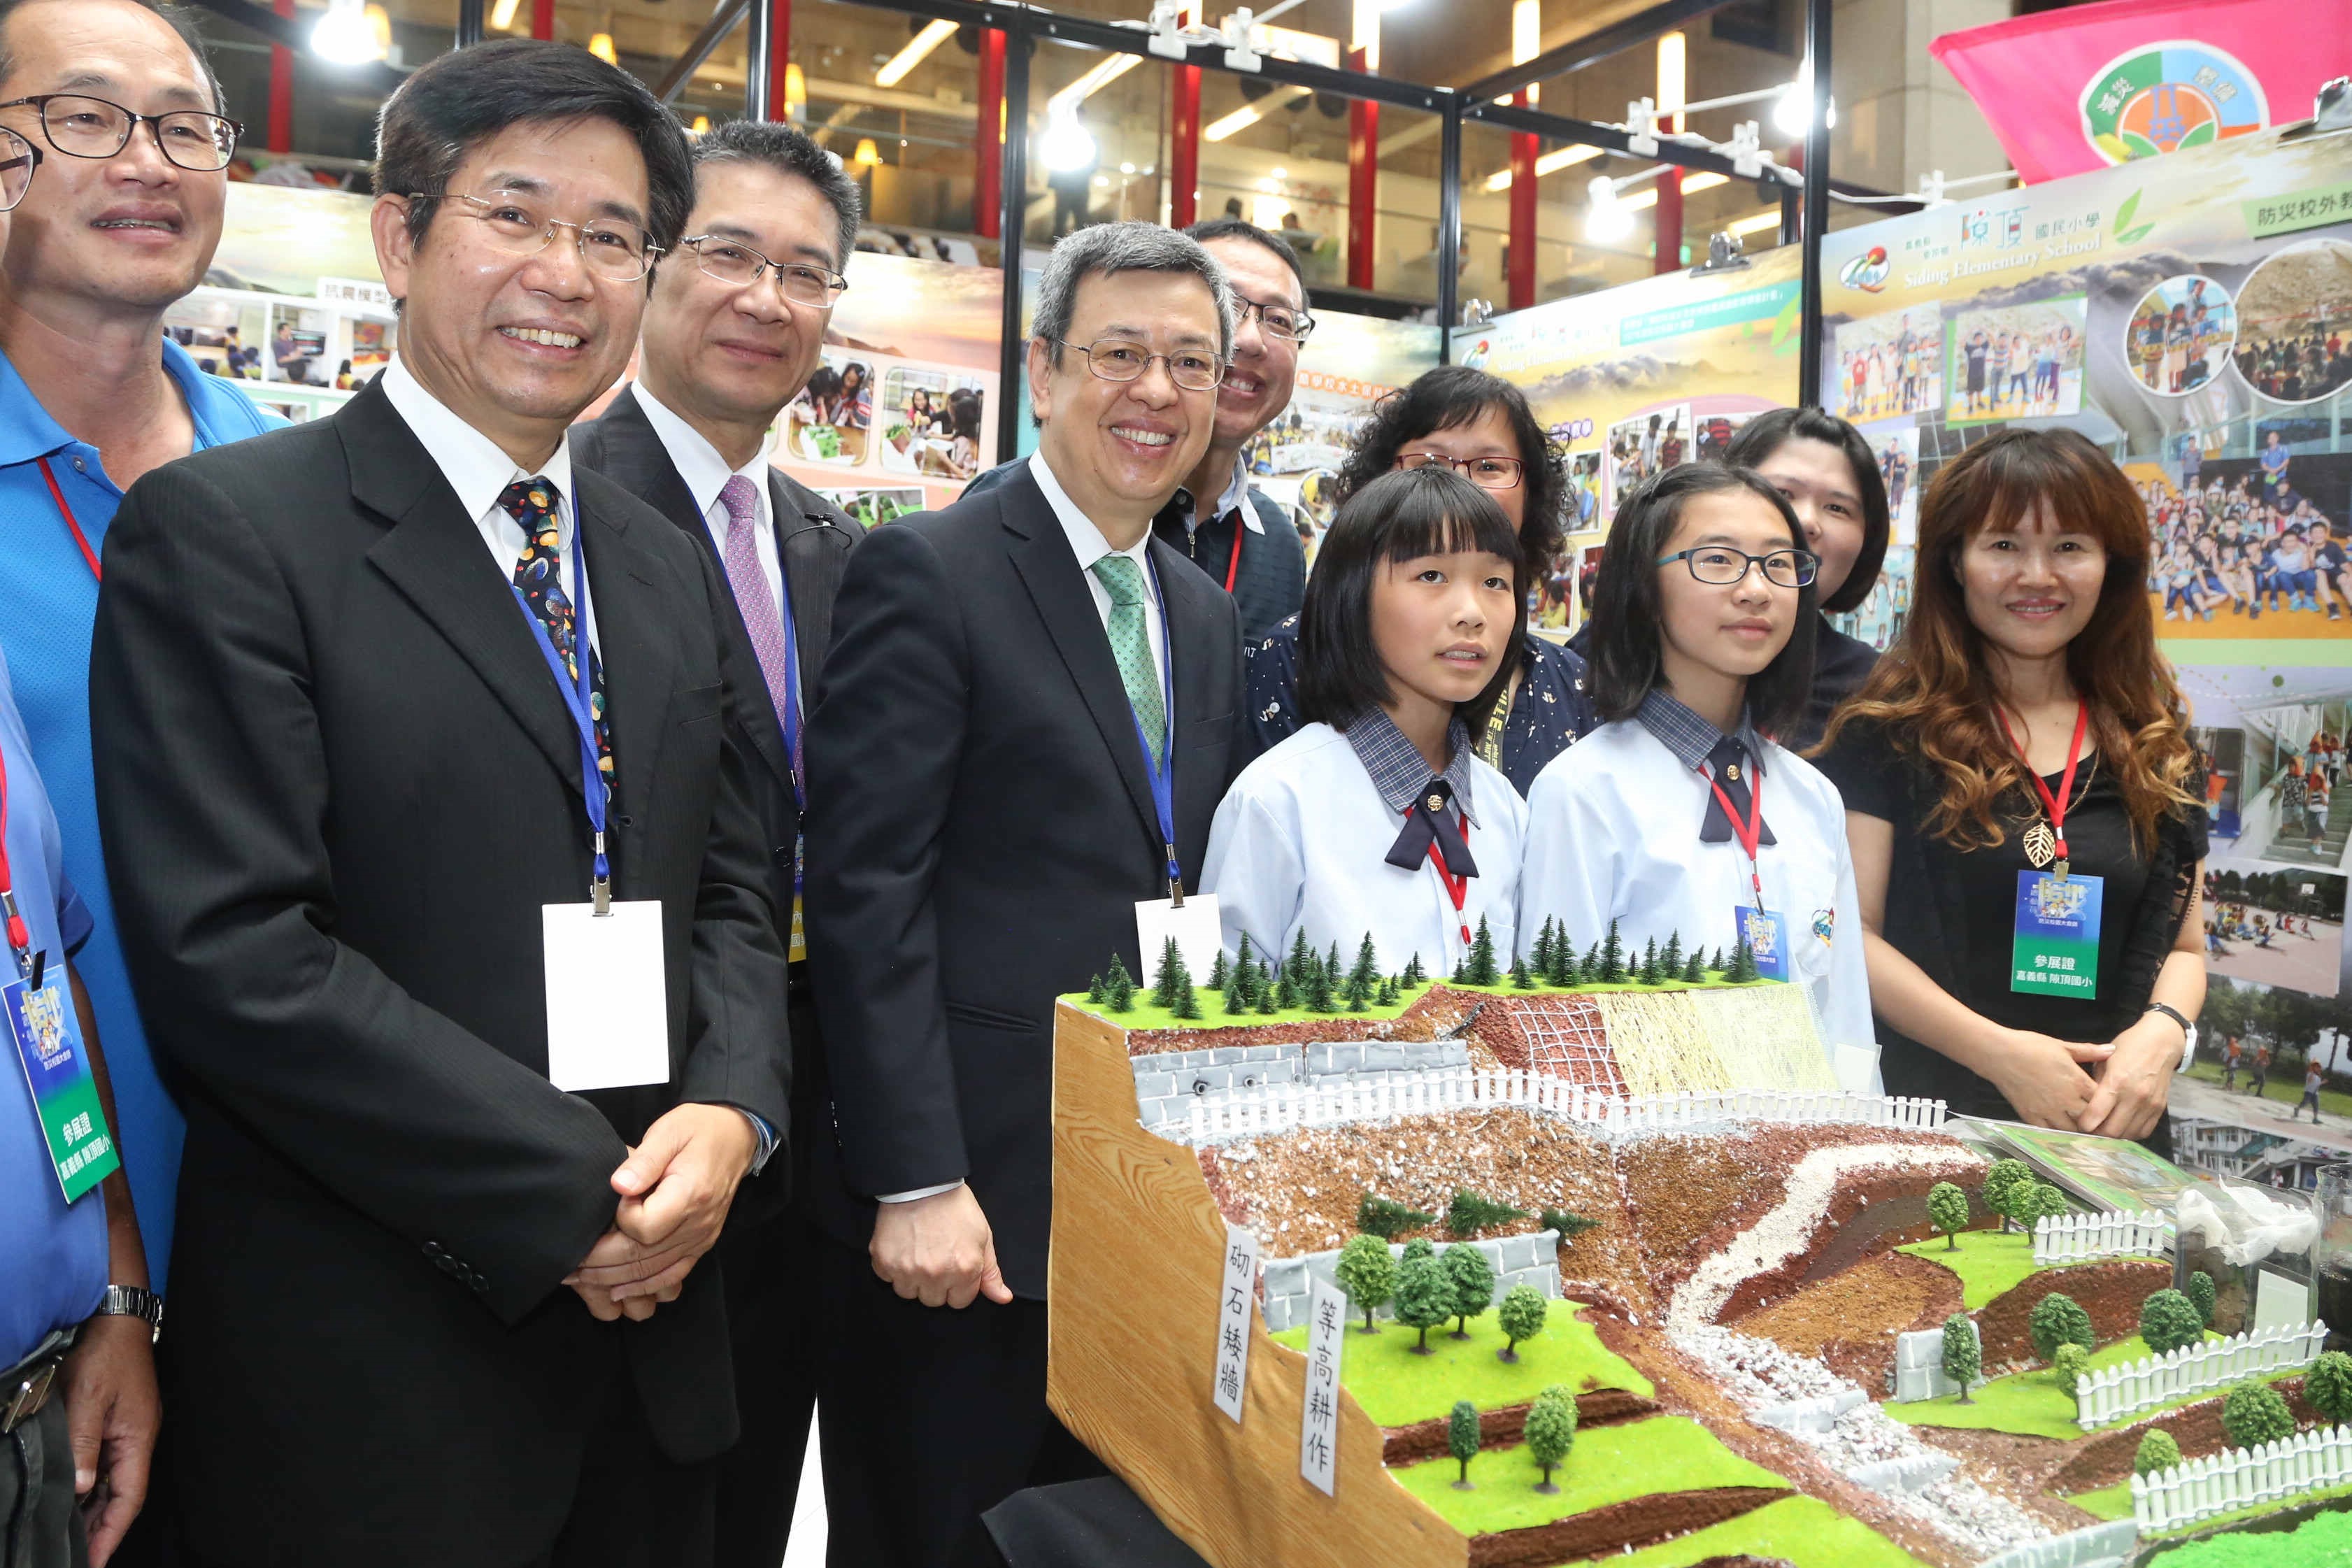 cover The Gathering of Disaster-resilient Schools: Eight Ministries Collaborate on Disaster Risk Reduction Education, Demonstrate Achievements through a Powerful Pop-up Exhibition at Taipei Main Station